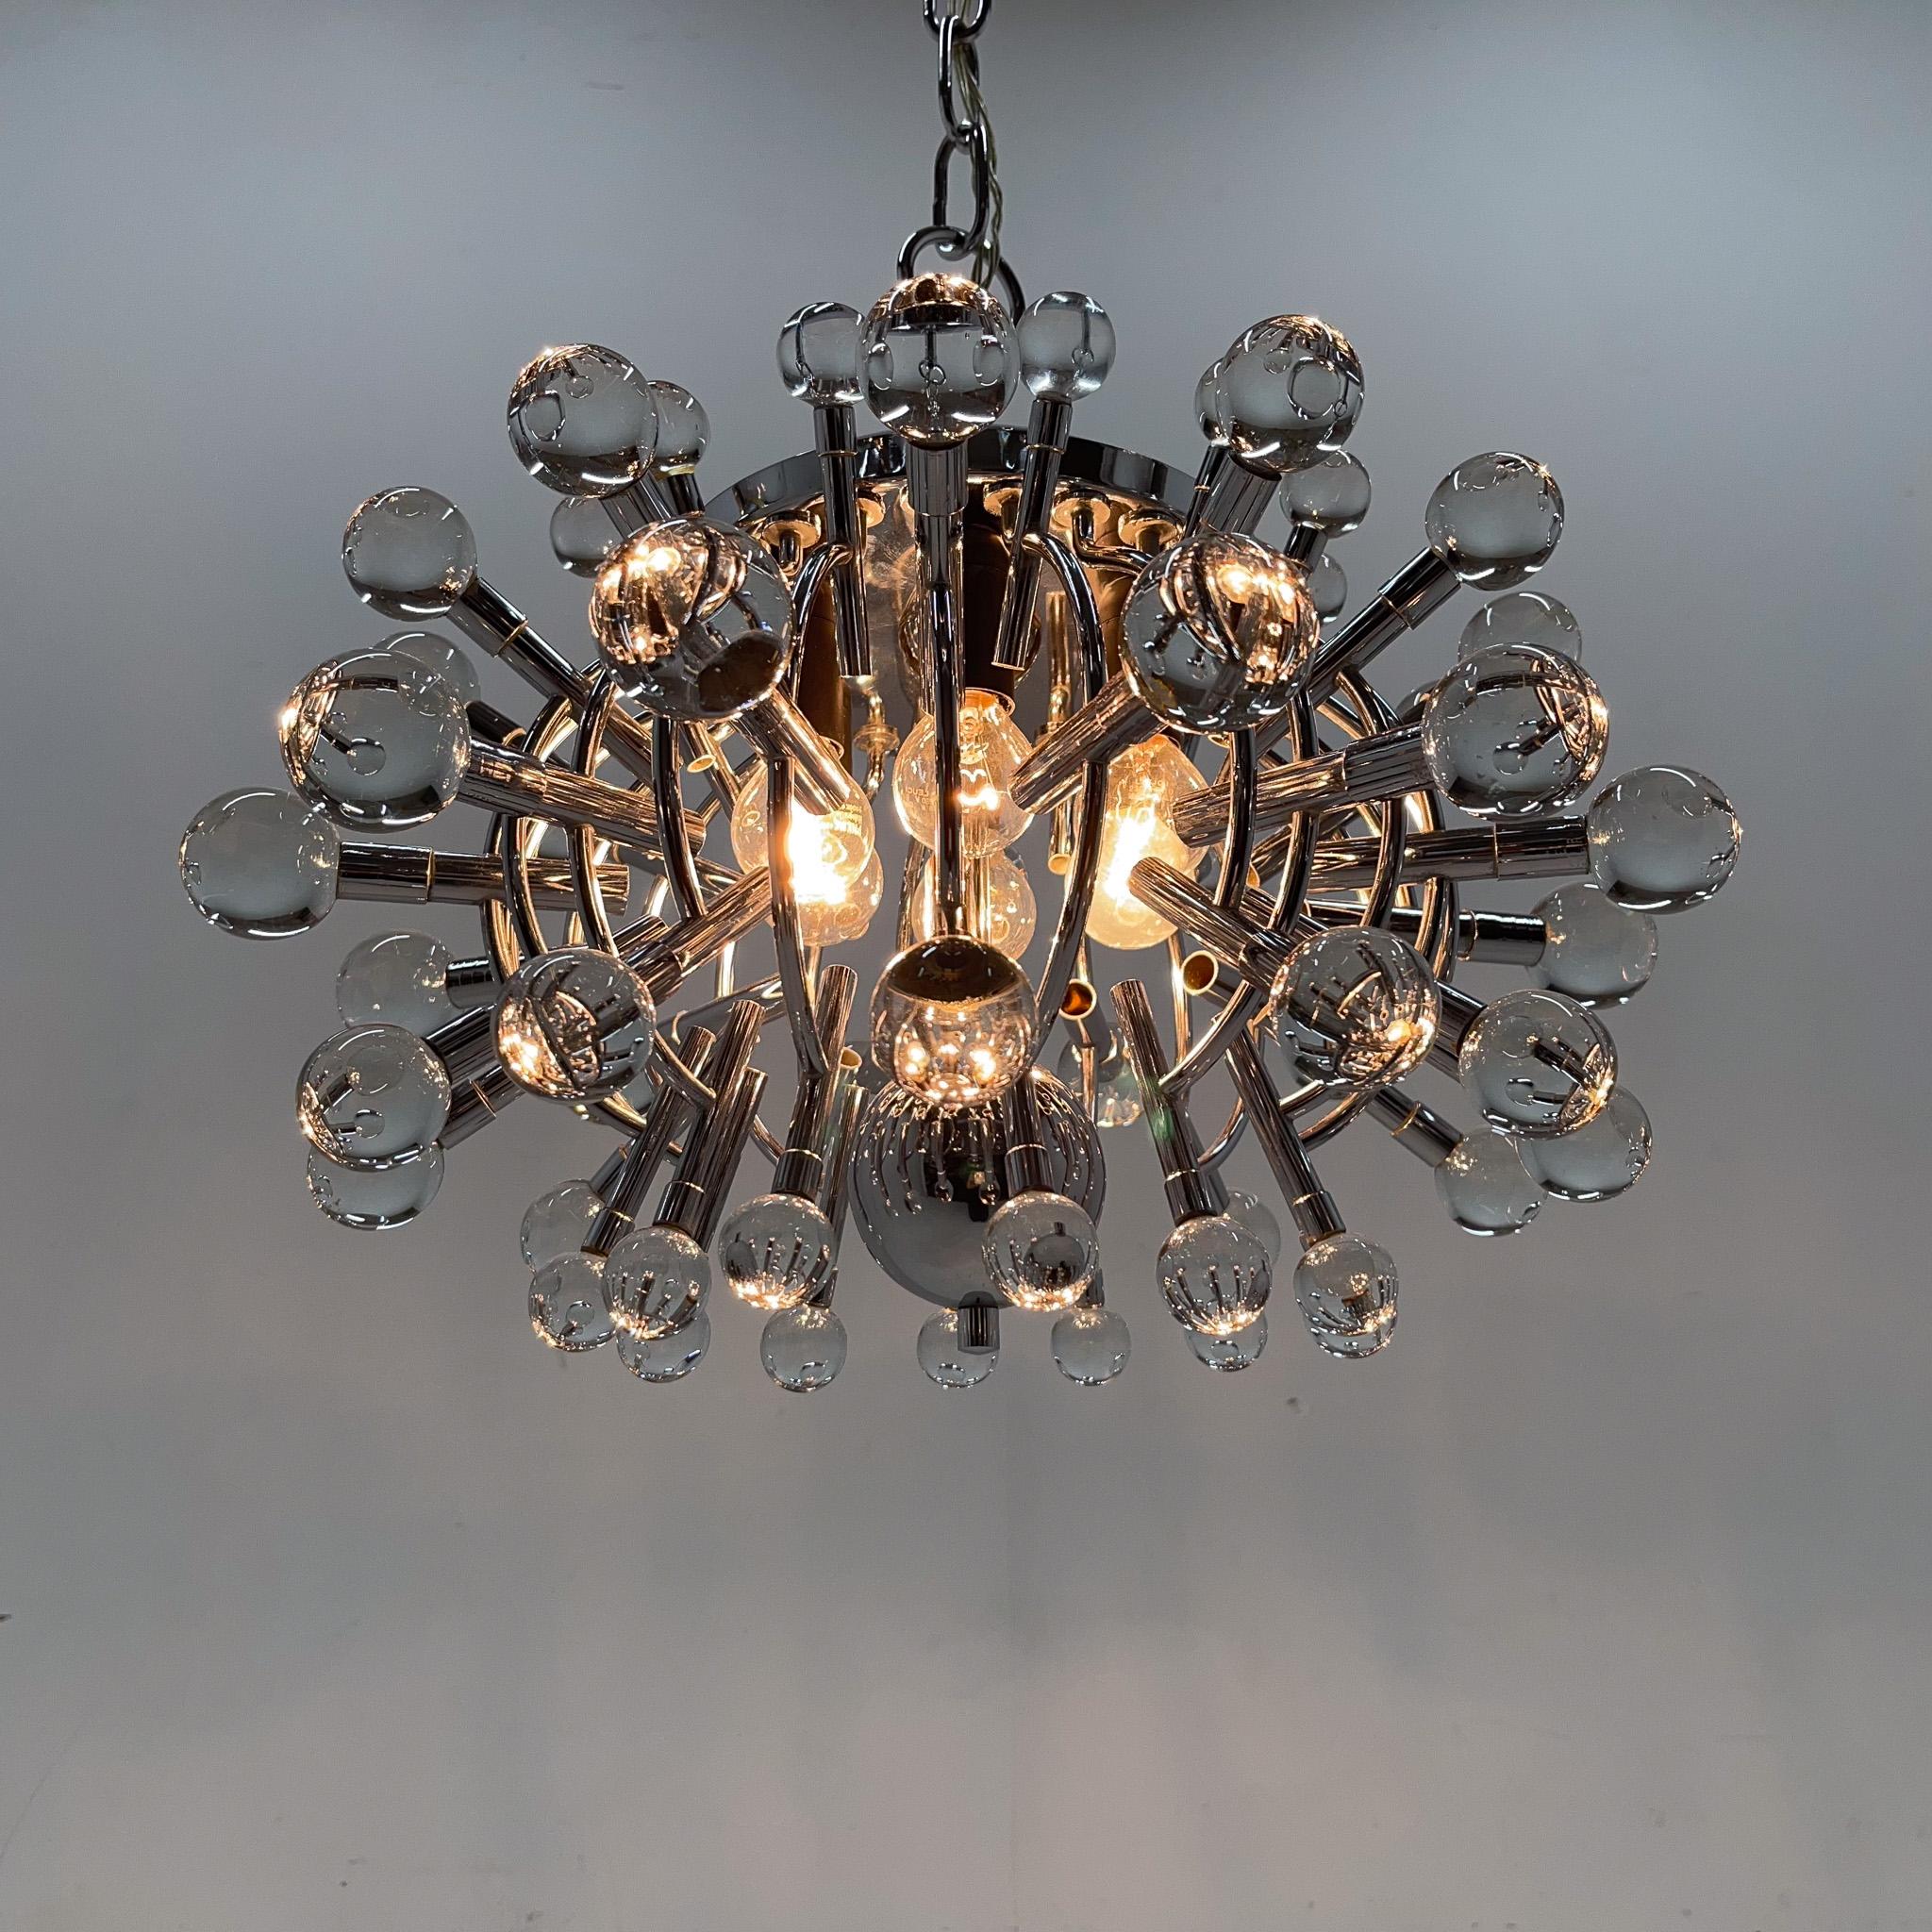 Vintage Italian chandelier with chrome finish and numerous crystal glass balls. 
Bulbs: 2x 1 E26-27. US wiring compatible.